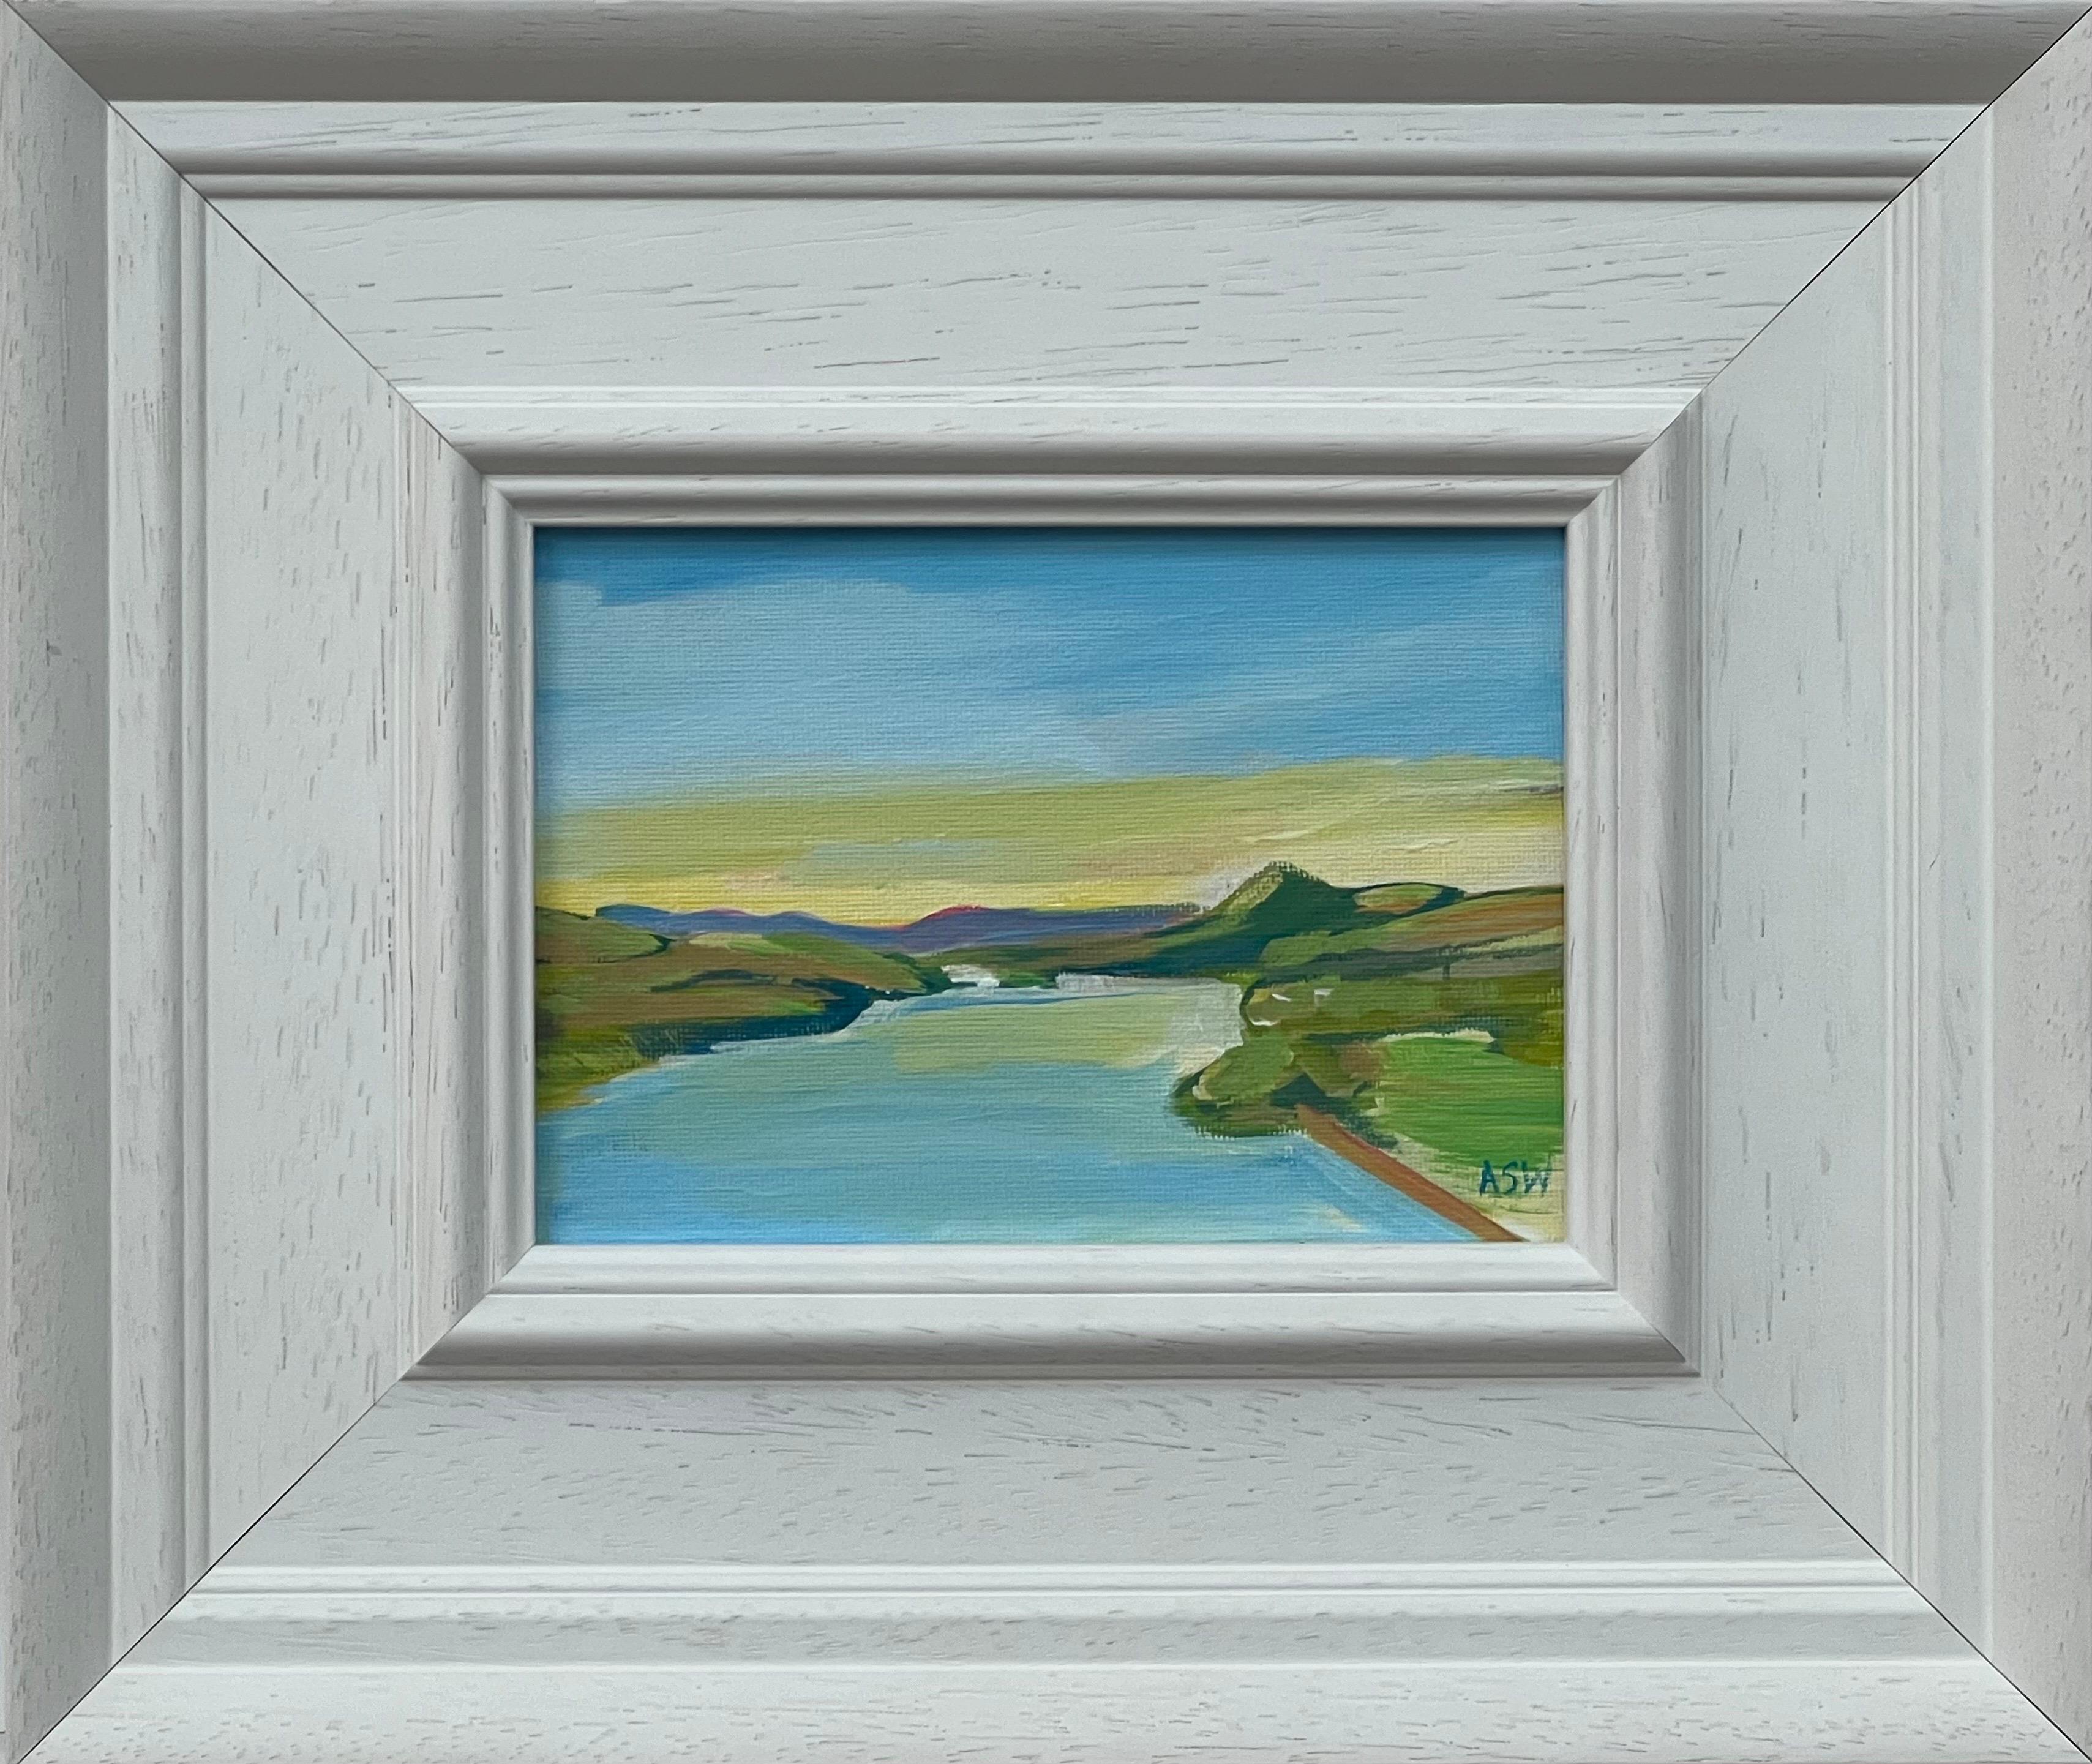 Angela Wakefield Landscape Painting - Miniature Painting Study of Hudson River, New York State, USA by British Artist